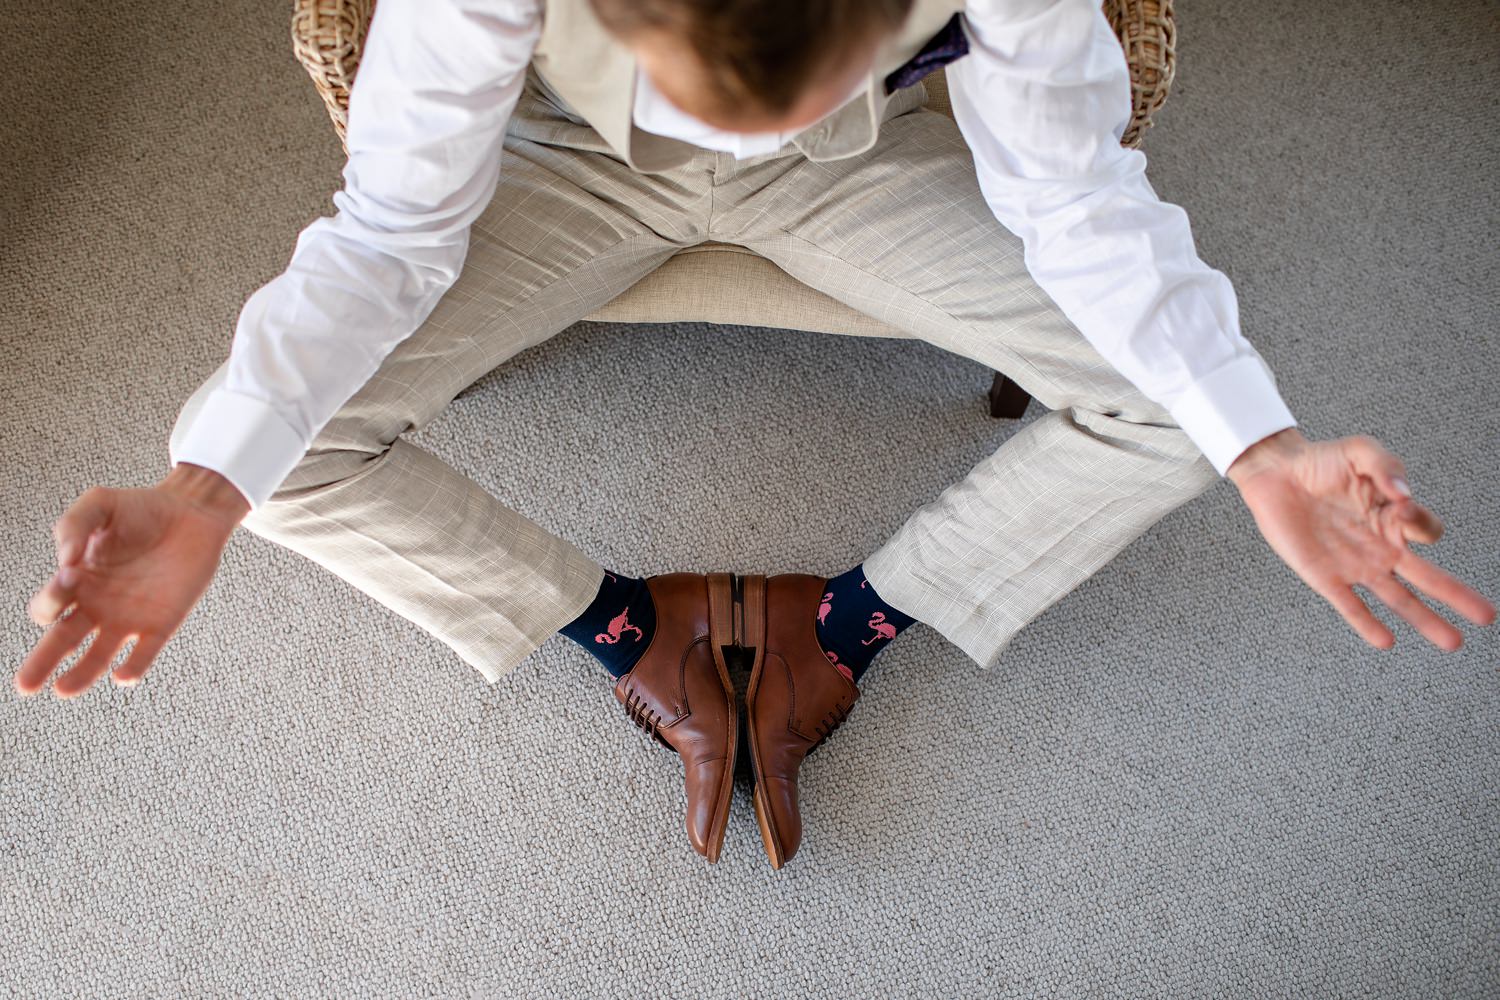 The groom takes a minute to strike a meditation pose, exposing his flamingo socks before he travels to greet guests at the wedding ceremony. Photography by wedding photographer in South Africa.